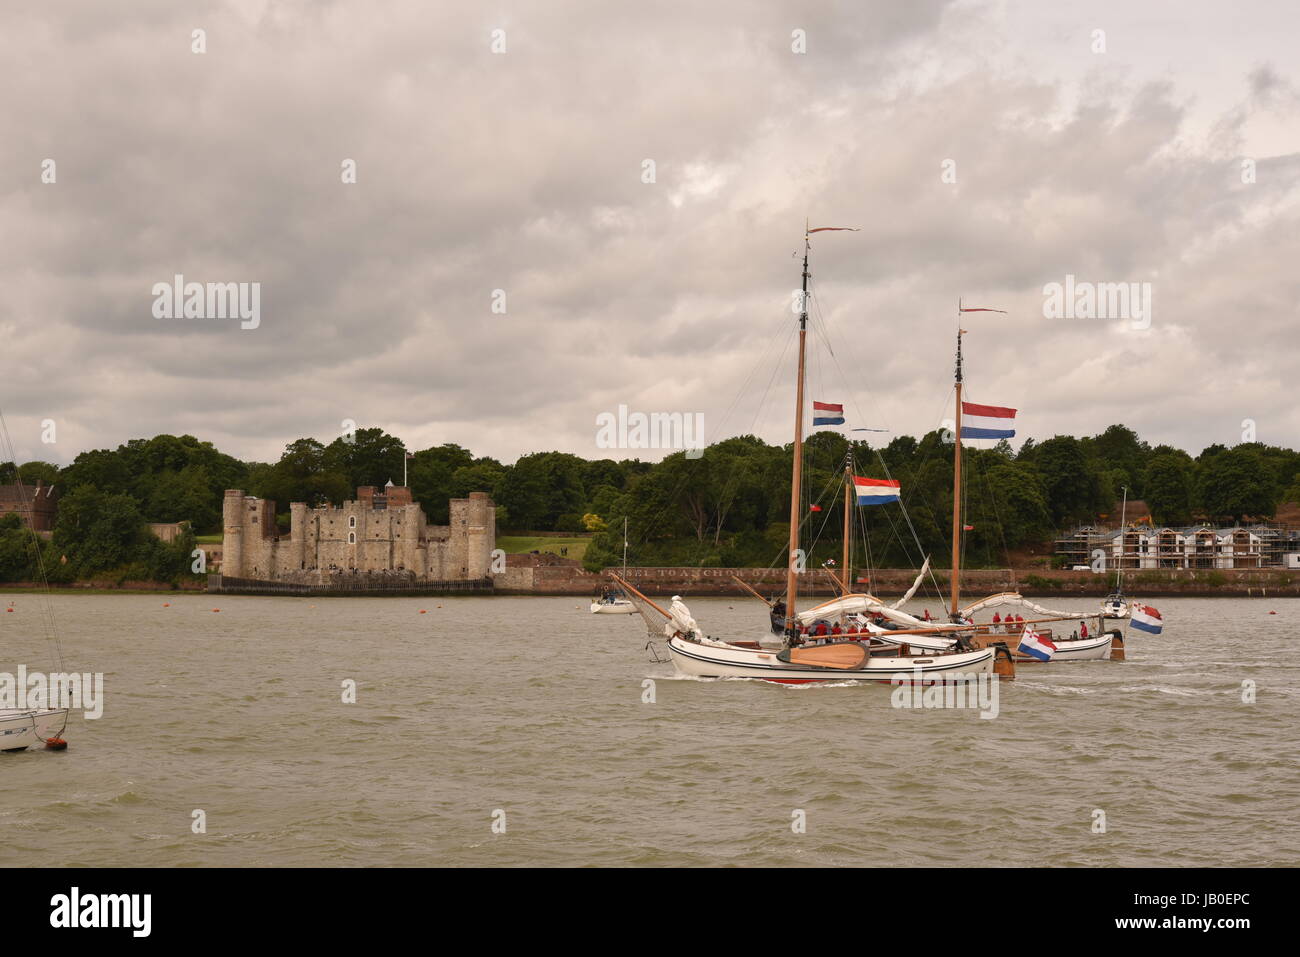 FLOTILLA OF DUTCH SHIPS ARRIVING ON THE RIVER MEDWAY FOR THE 350TH ANNIVERSARY CELEBRATIONS OF THE BATTLE OF THE MEDWAY Stock Photo